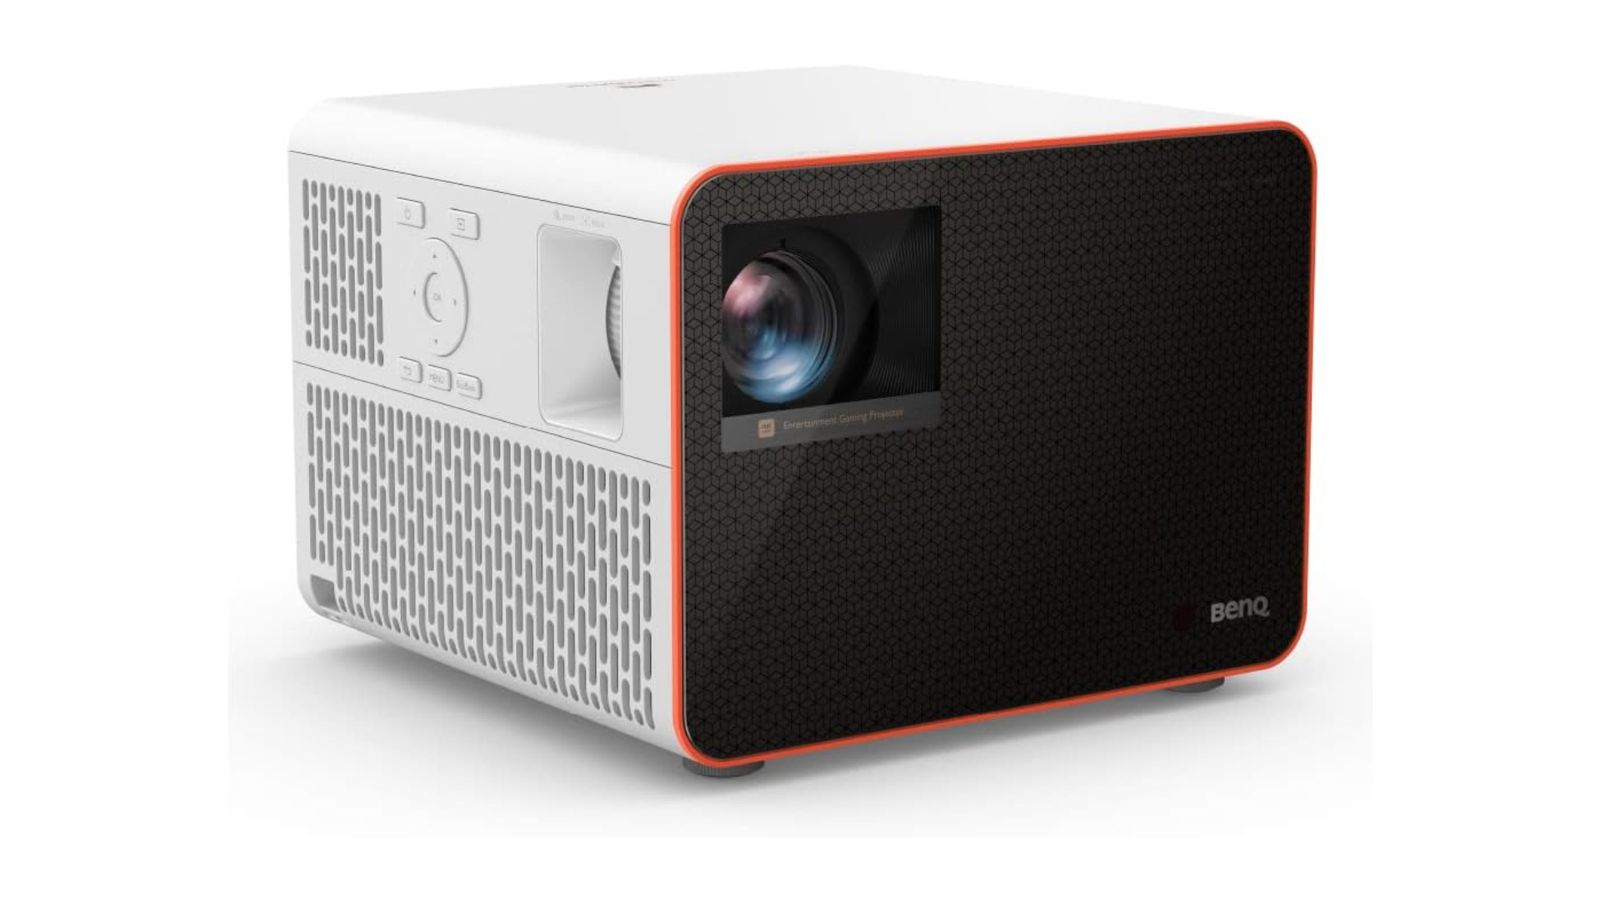 BenQ X3000i product image of a black and white box-shaped projector with orange details.